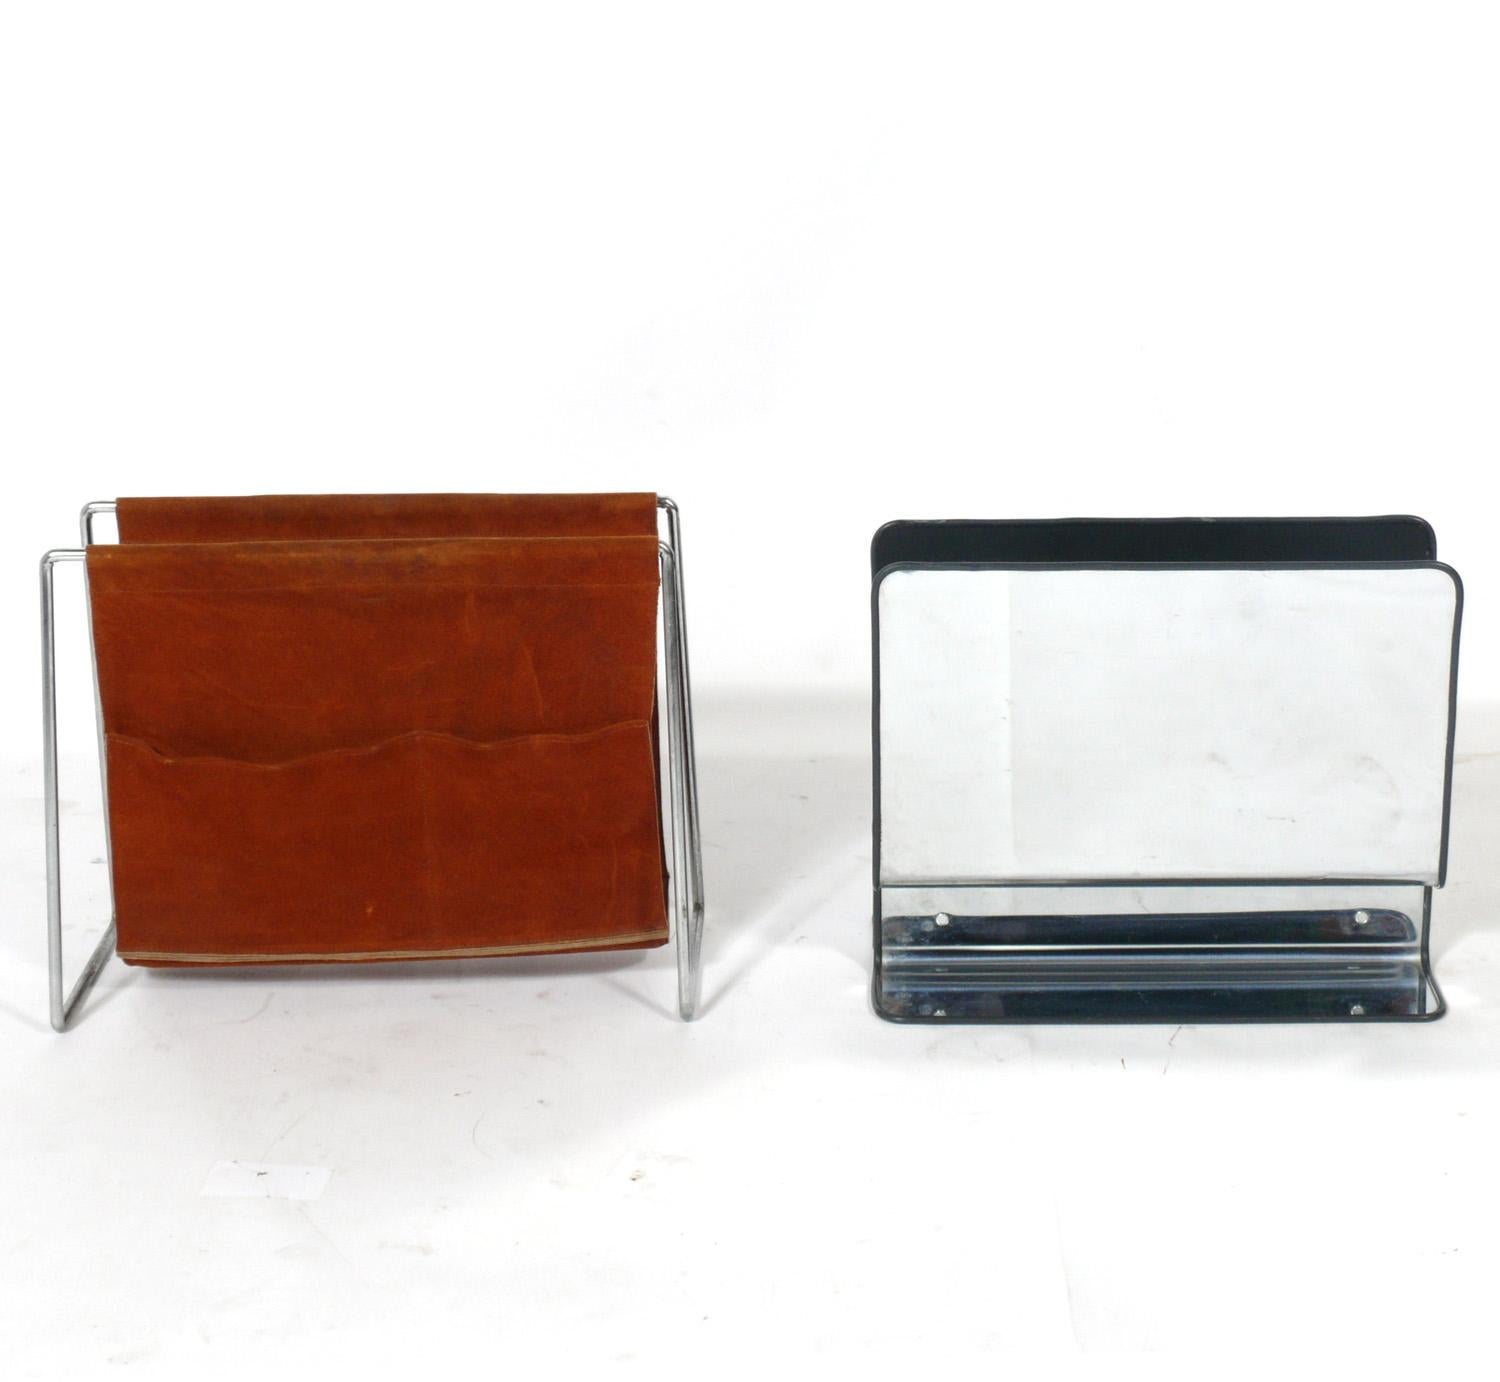 Selection of Mid-Century Modern magazine racks, circa 1960s. They are:
1) Danish modern suede and chrome magazine rack, in the manner of Poul Kjaerholm, seen at the top left. It measures, 17.25